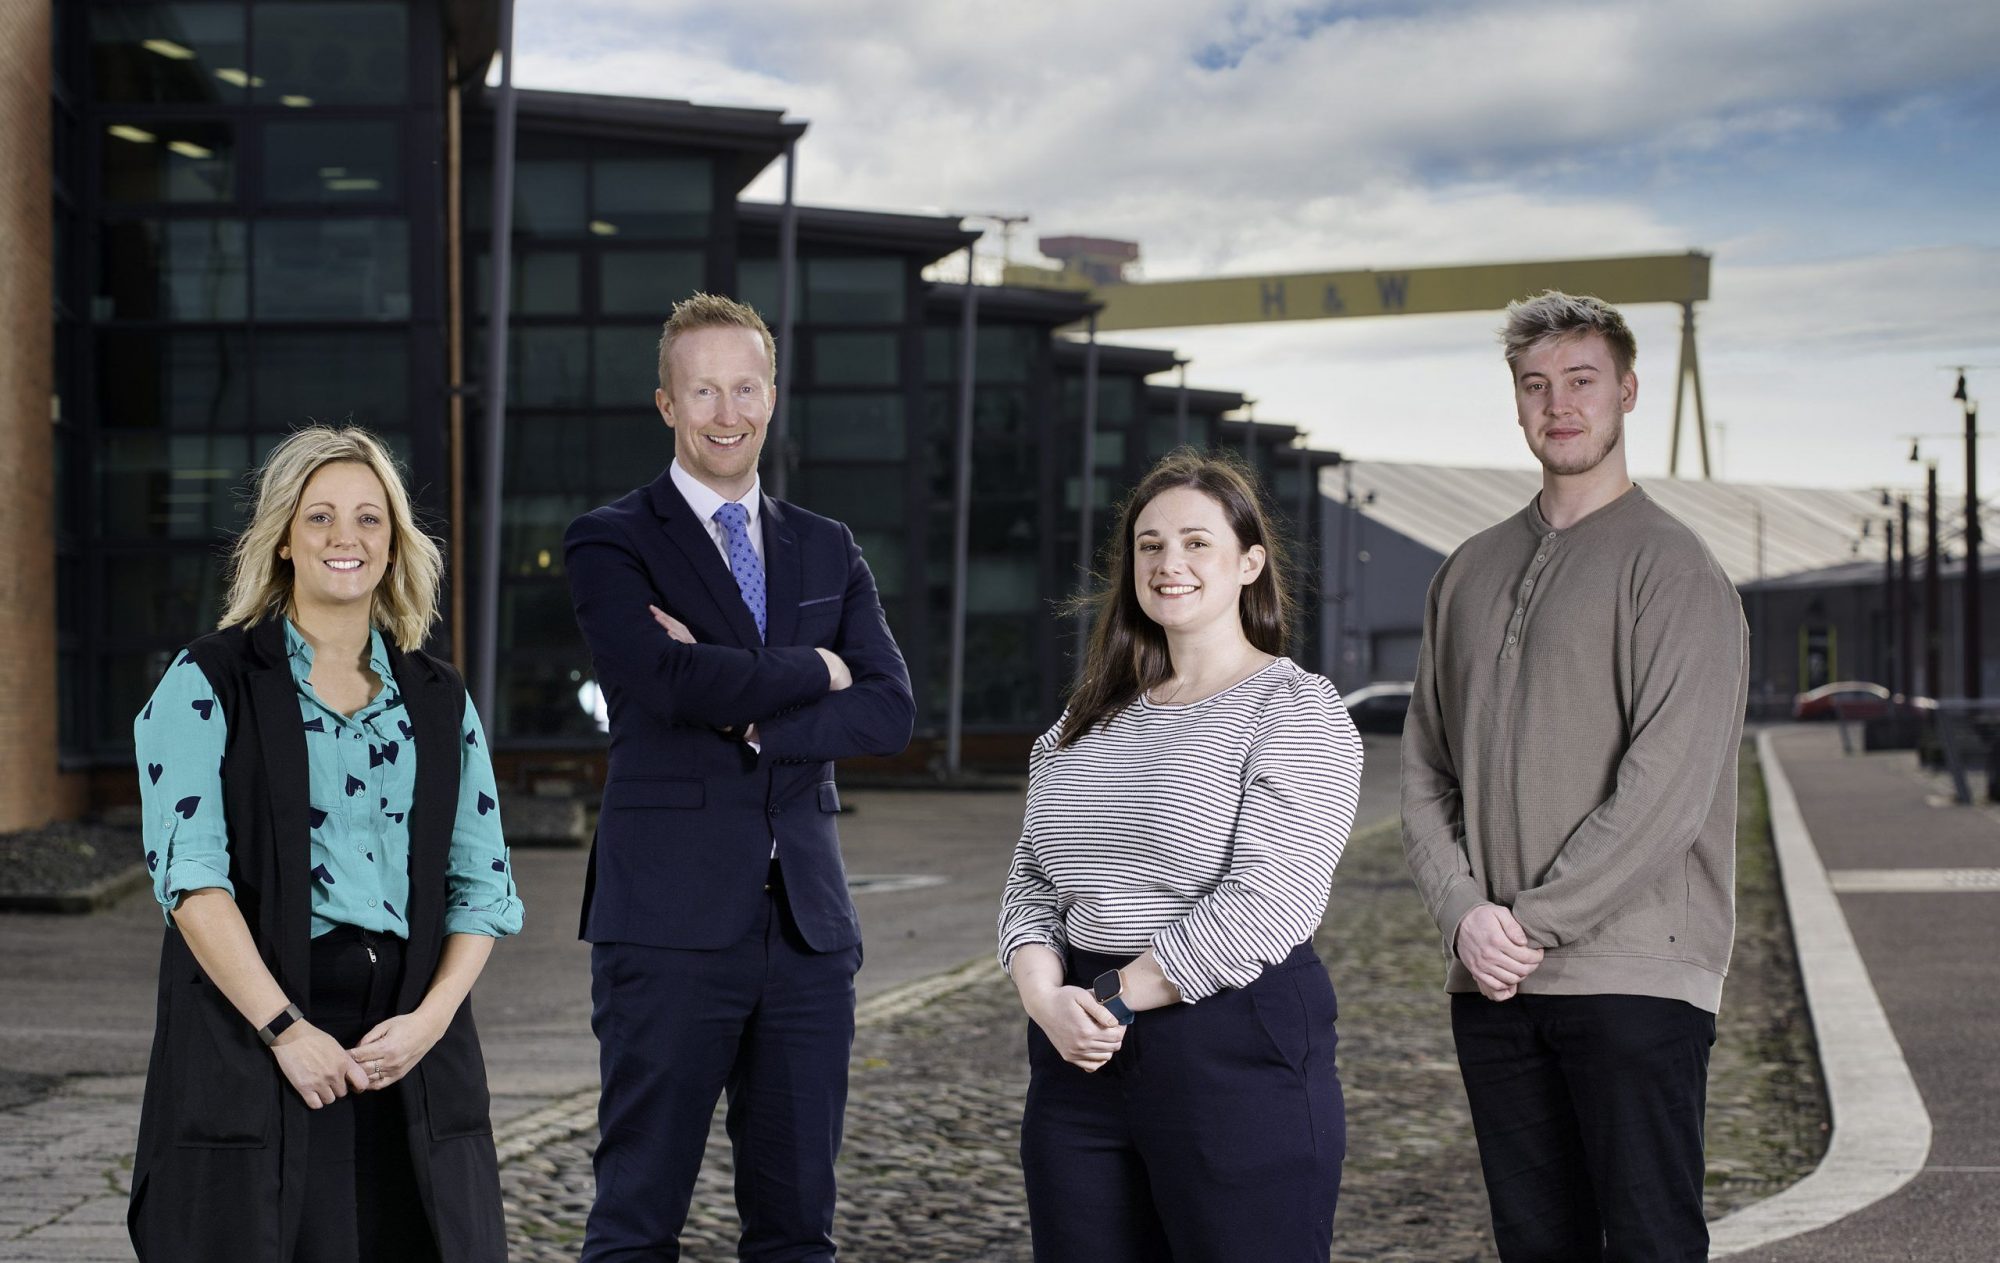 INVENT 2022 now open for innovators and entrepreneurs across Northern Ireland